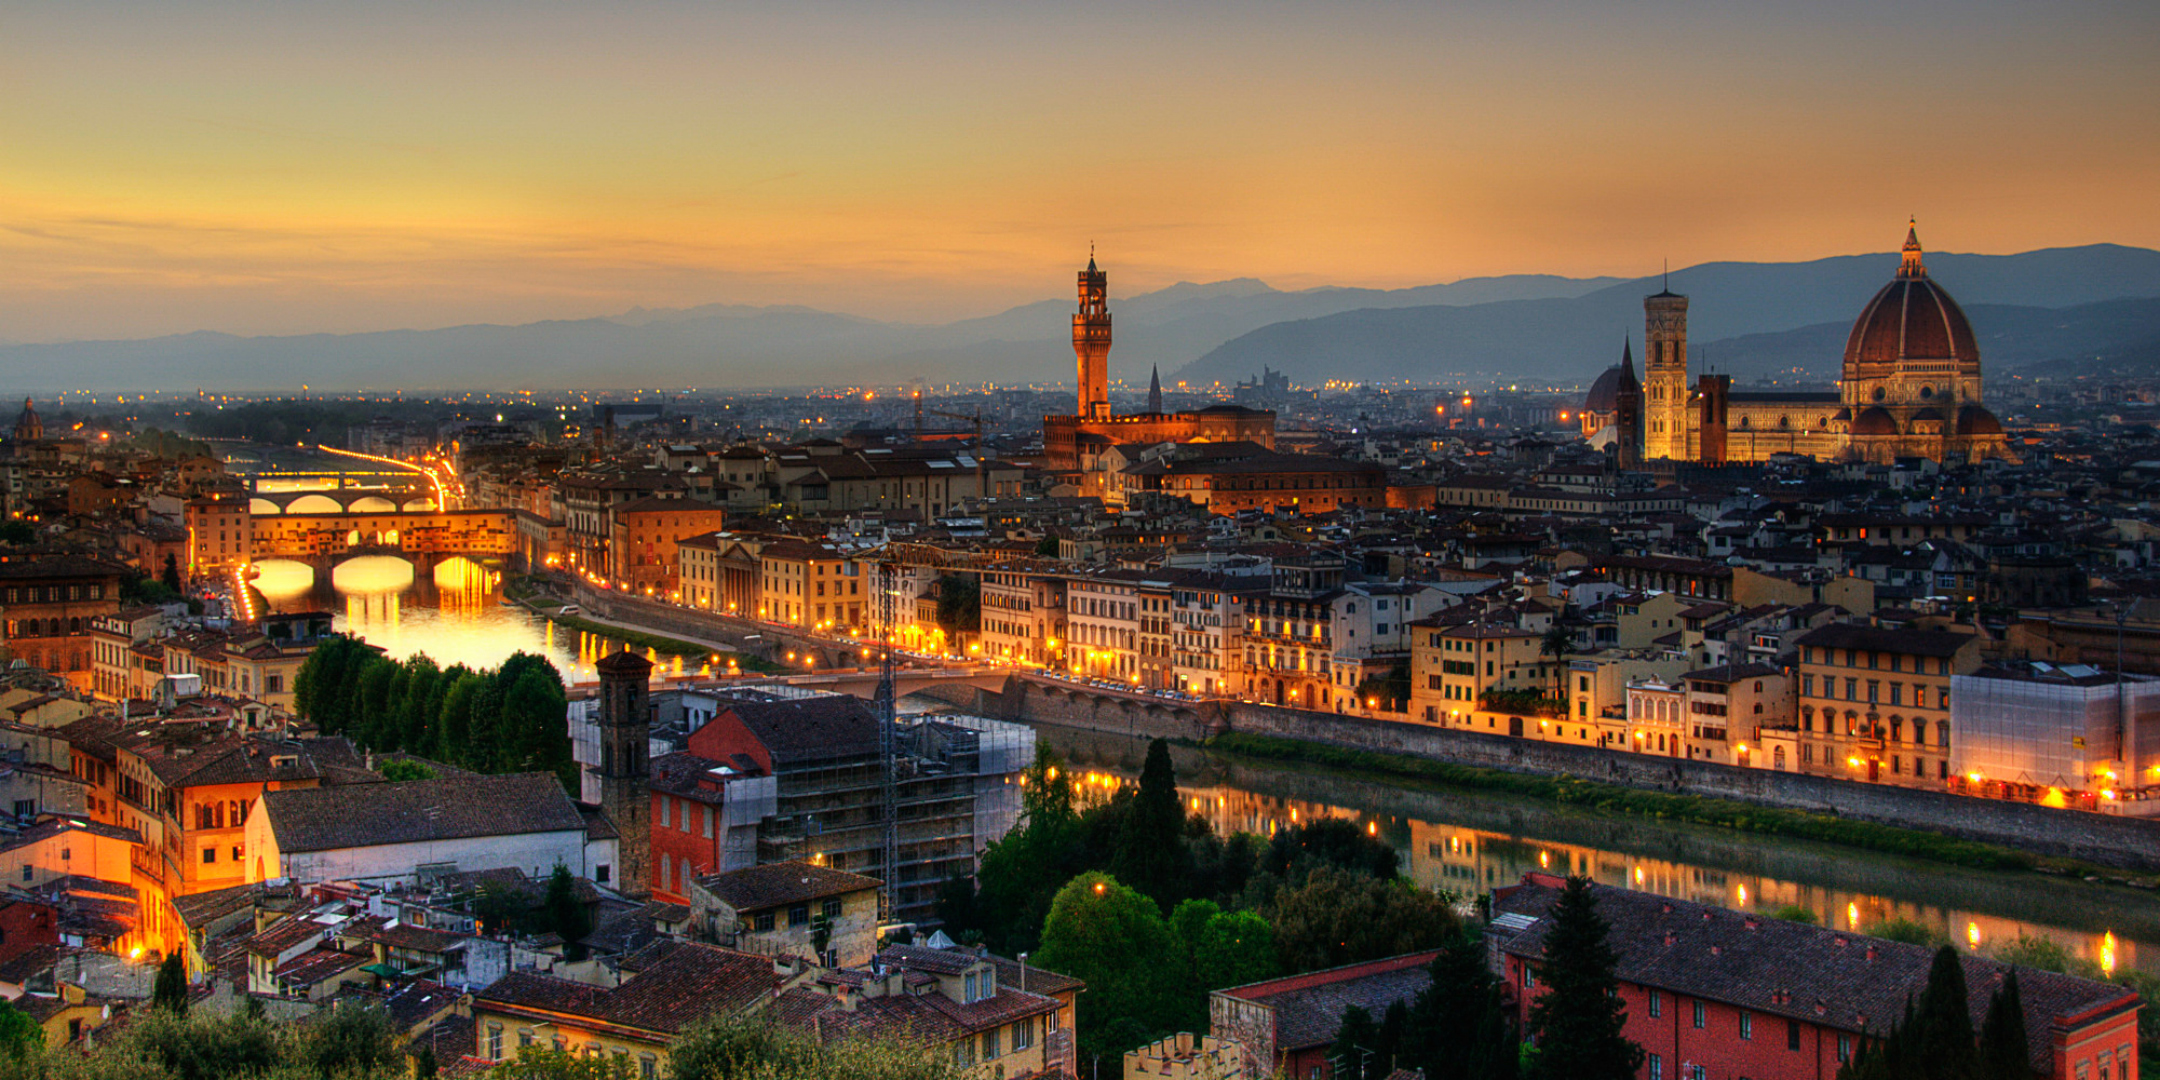 florence, italy, man made, building, city, cityscape, night, river, cities